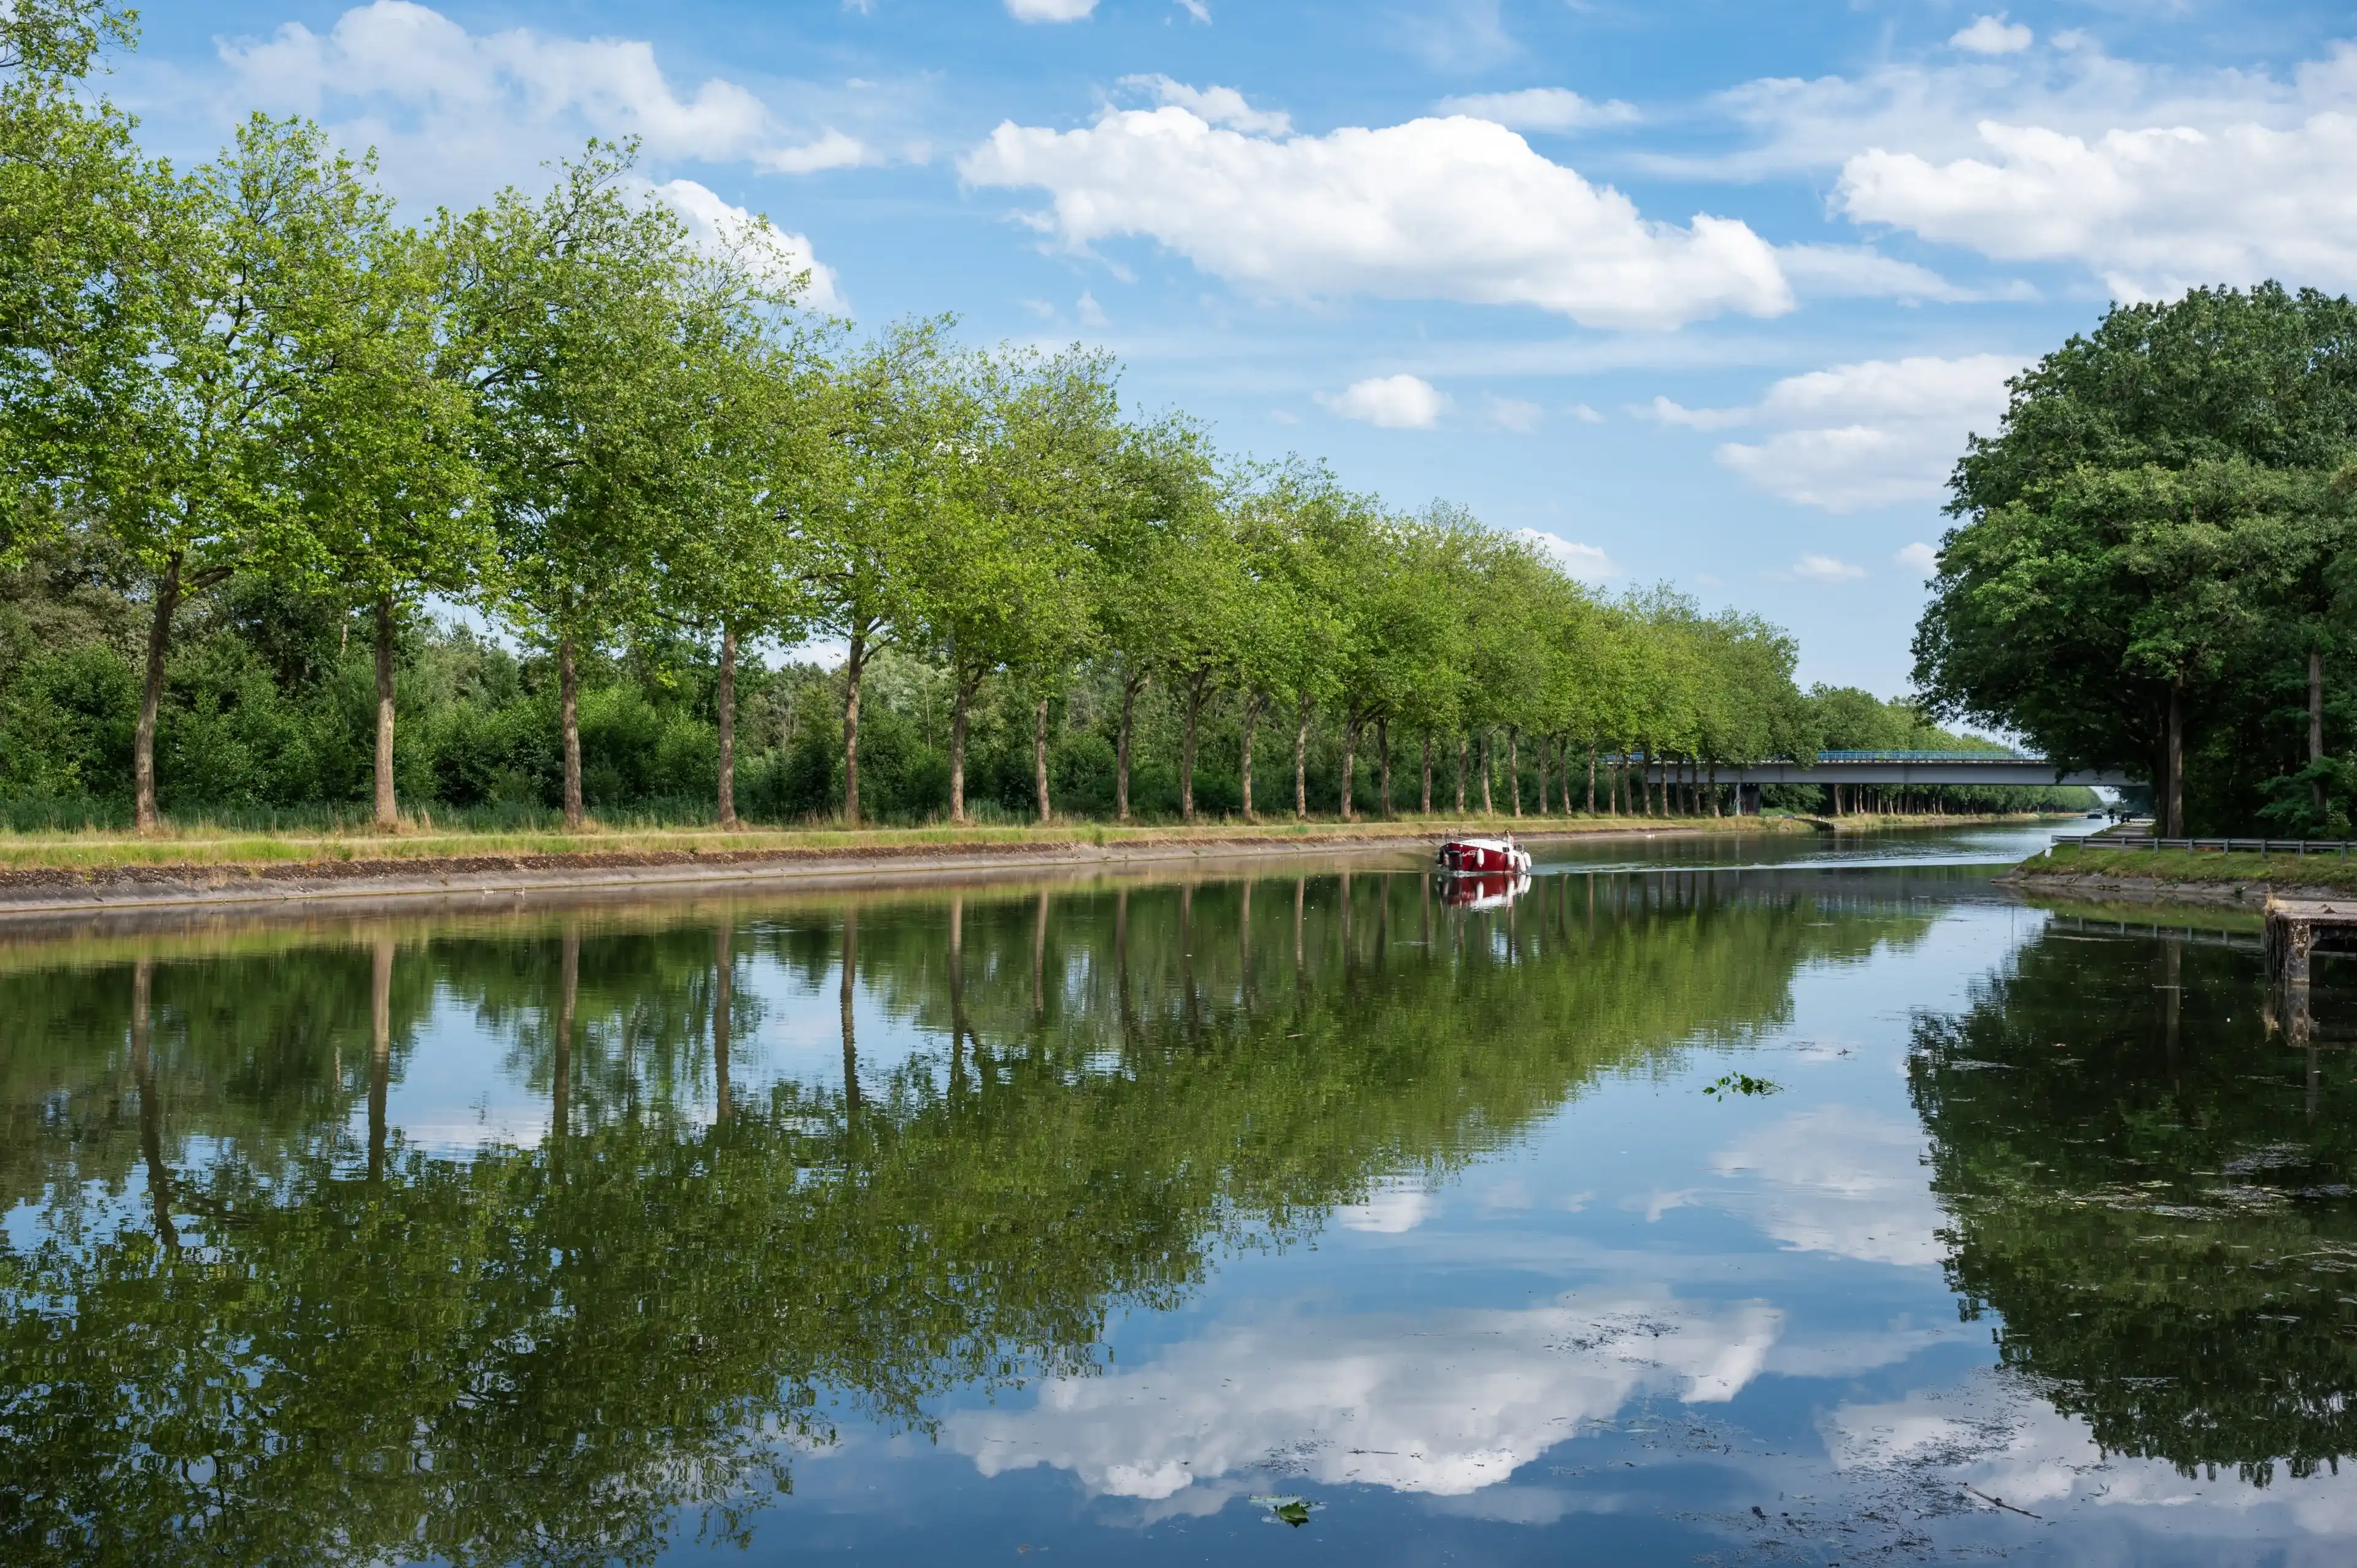 Bocholt, Limburg, Belgium, July 14, 2023 - Trees reflecting in the Bocholt Herentals canal with a pleasure boat